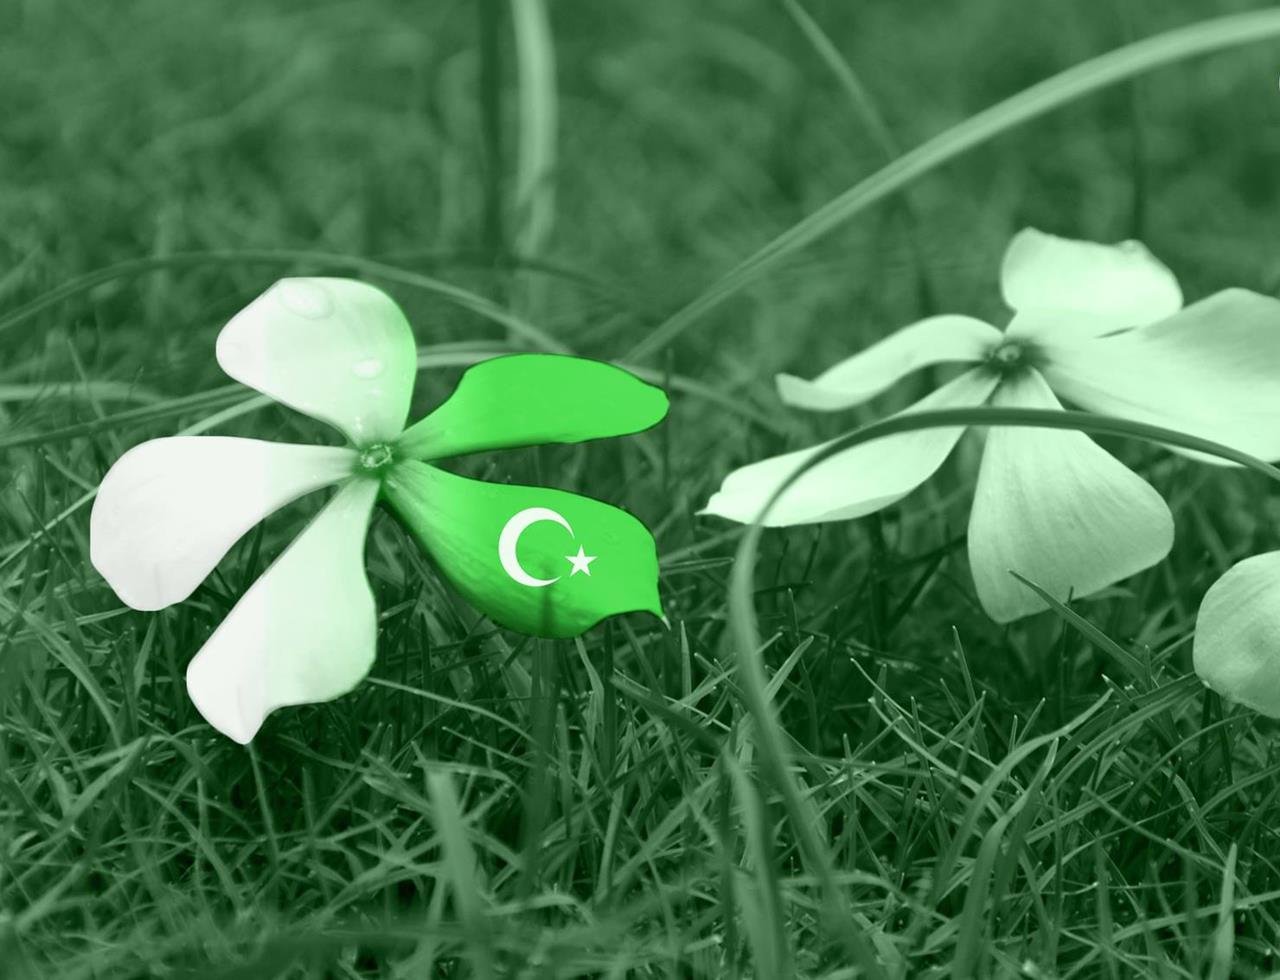 Happy Independence Day Pakistan New Wallpapers 2014